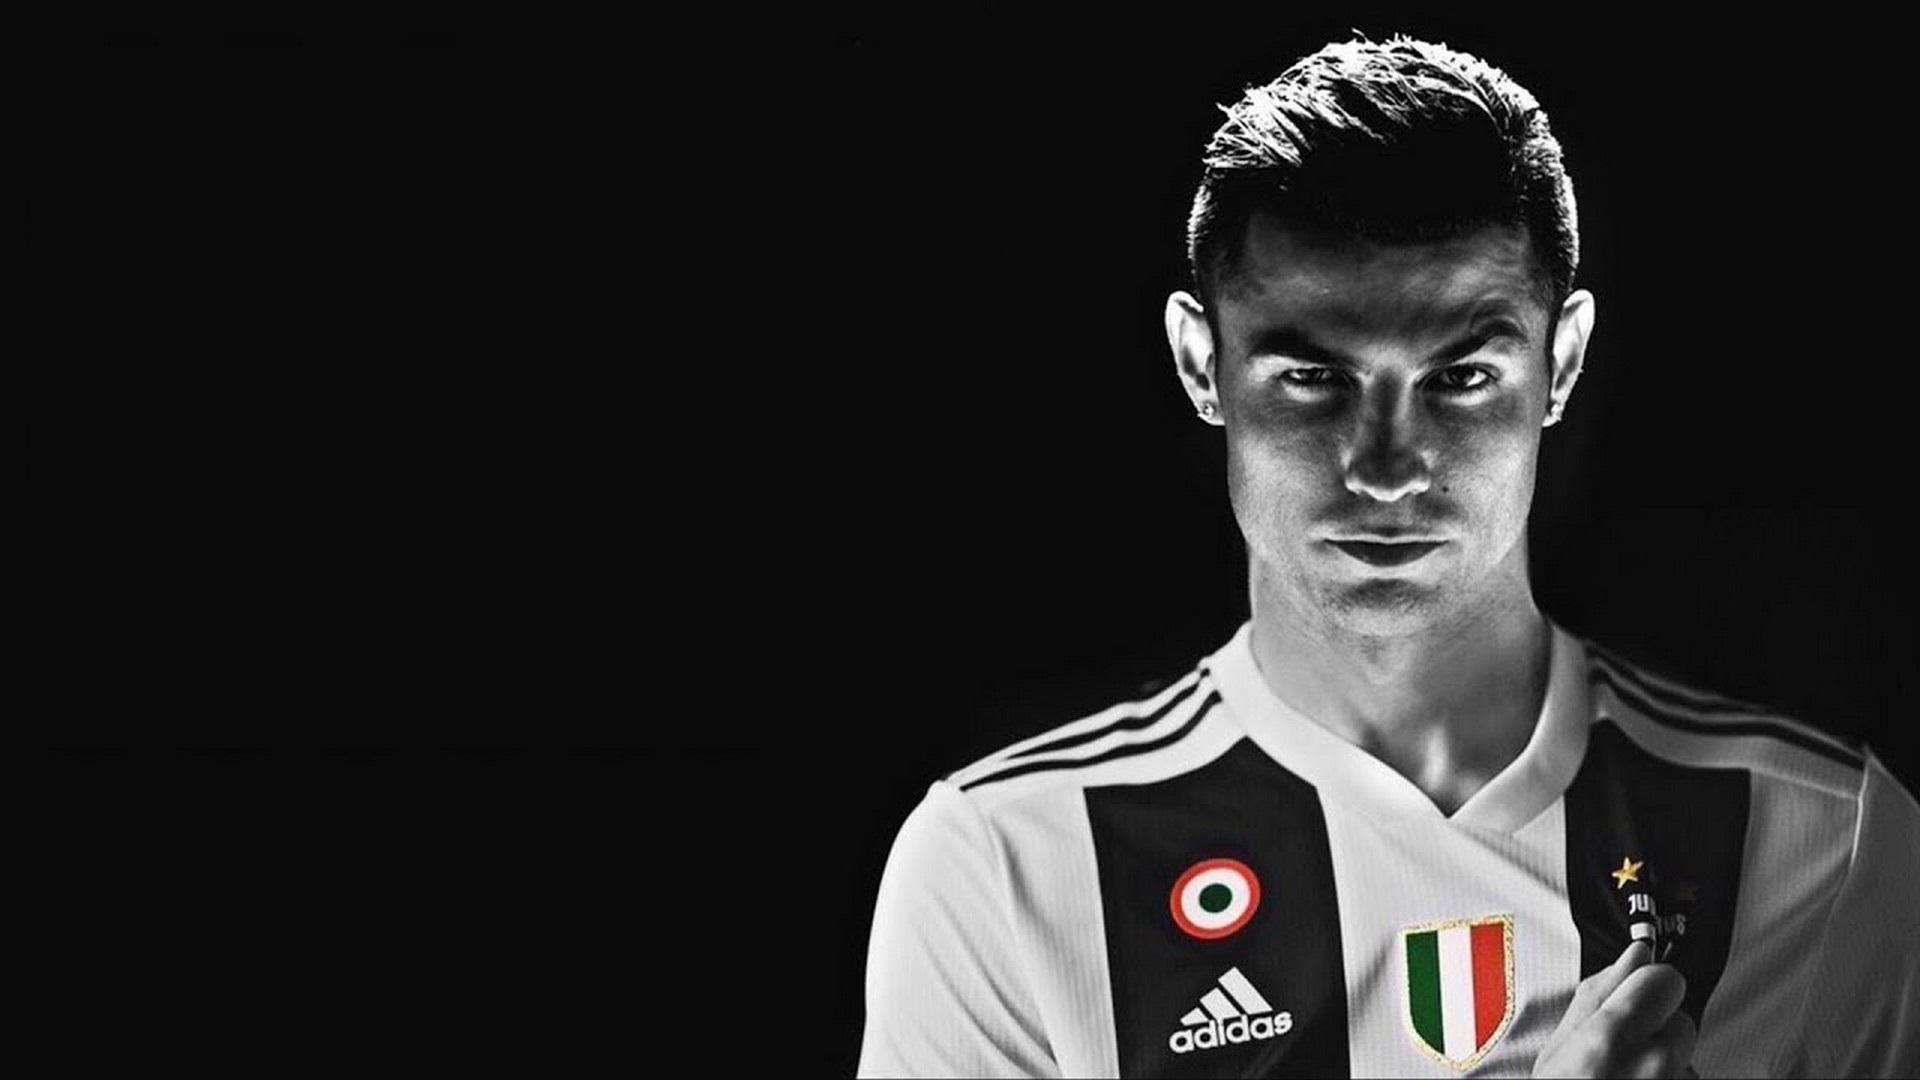 Desktop Wallpaper Cristiano Ronaldo Juventus with image resolution 1920x1080 pixel. You can use this wallpaper as background for your desktop Computer Screensavers, Android or iPhone smartphones